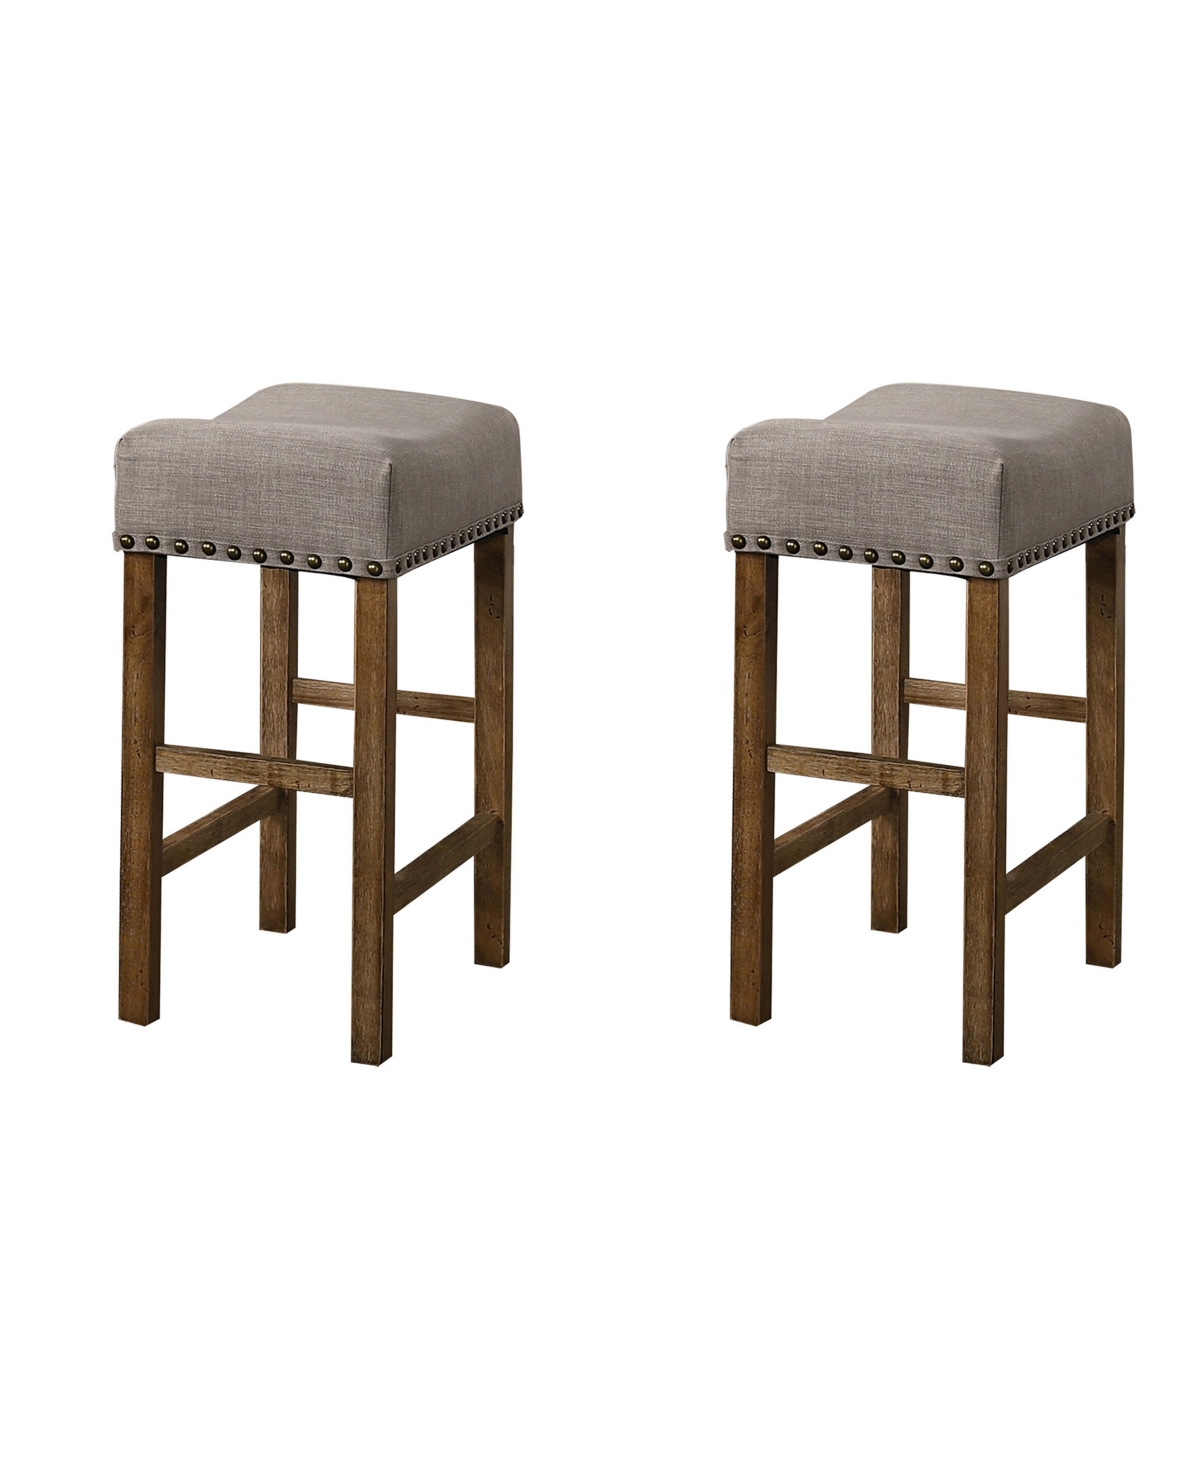 Best Master Furniture Janet Driftwood Transitional Counterheight Stools, Set Of 2 In Antique Natural Oak